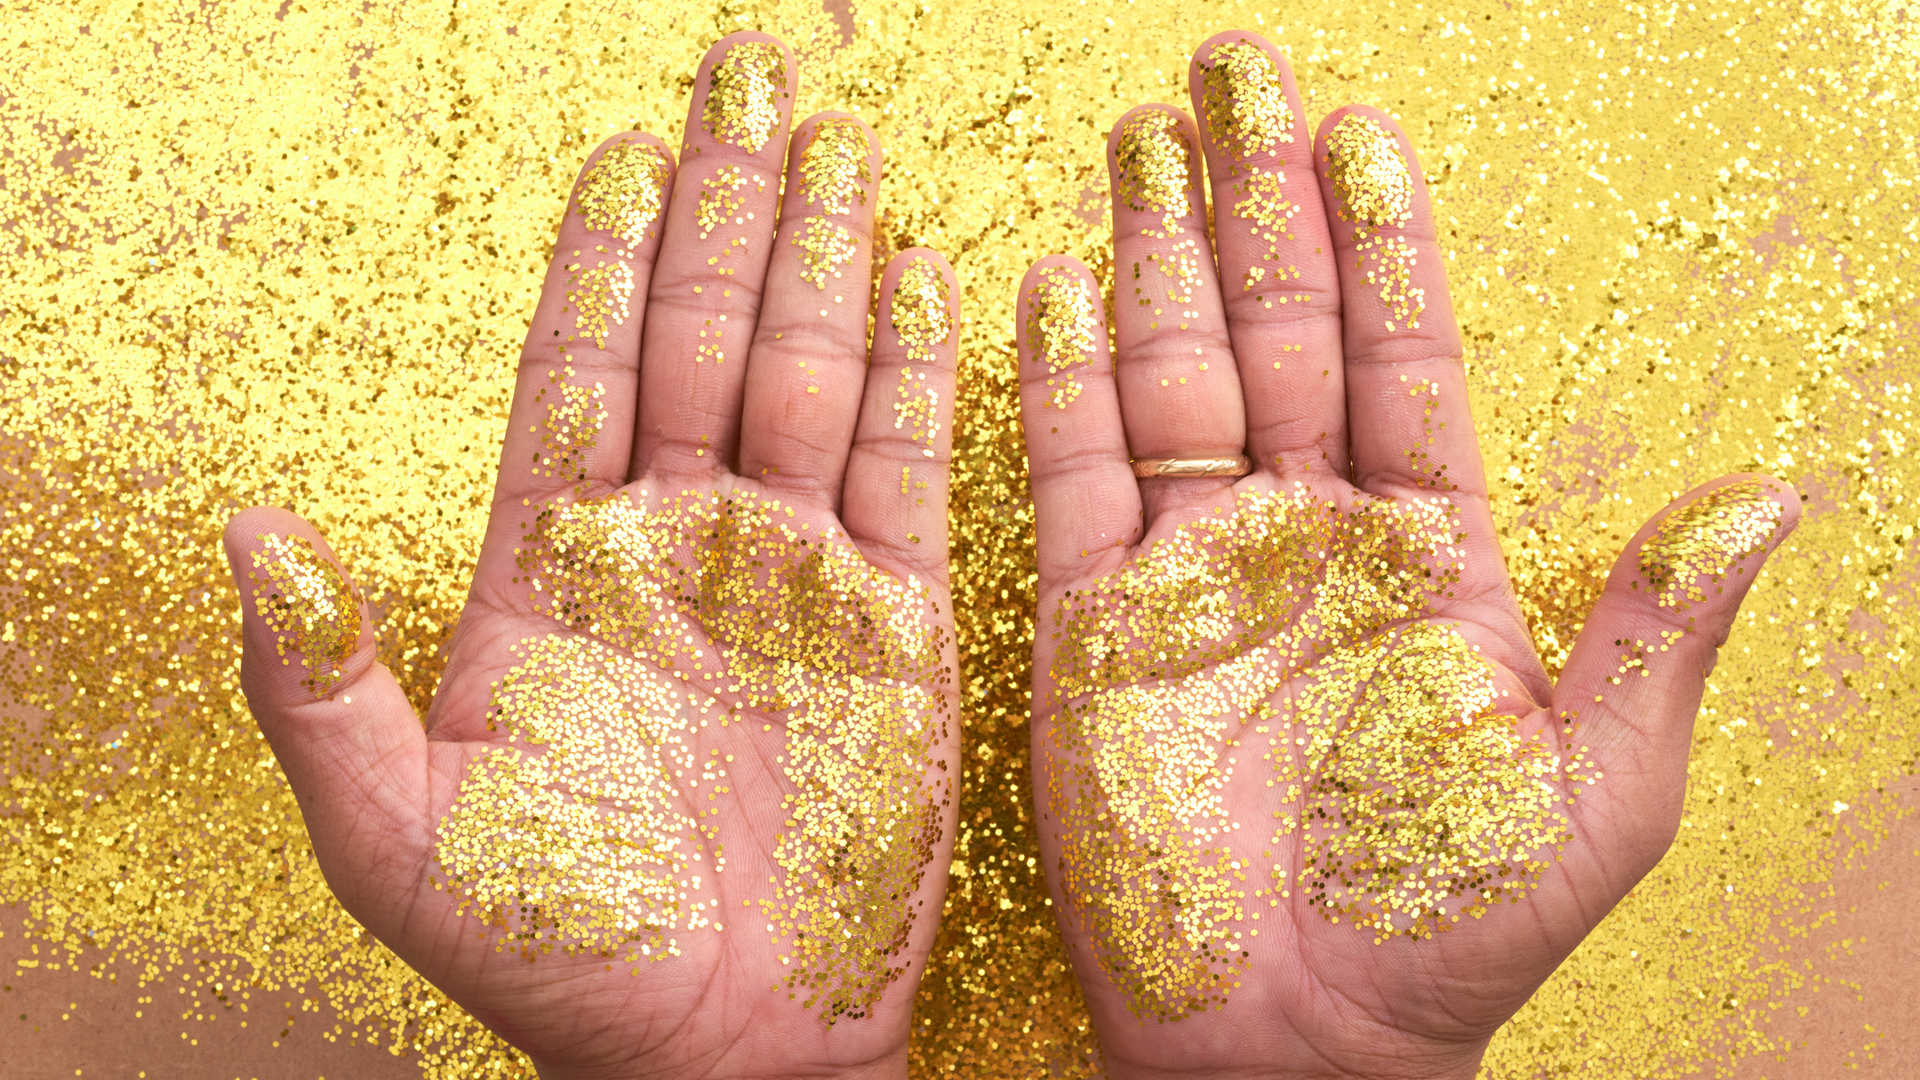 Two hands covered in glitter